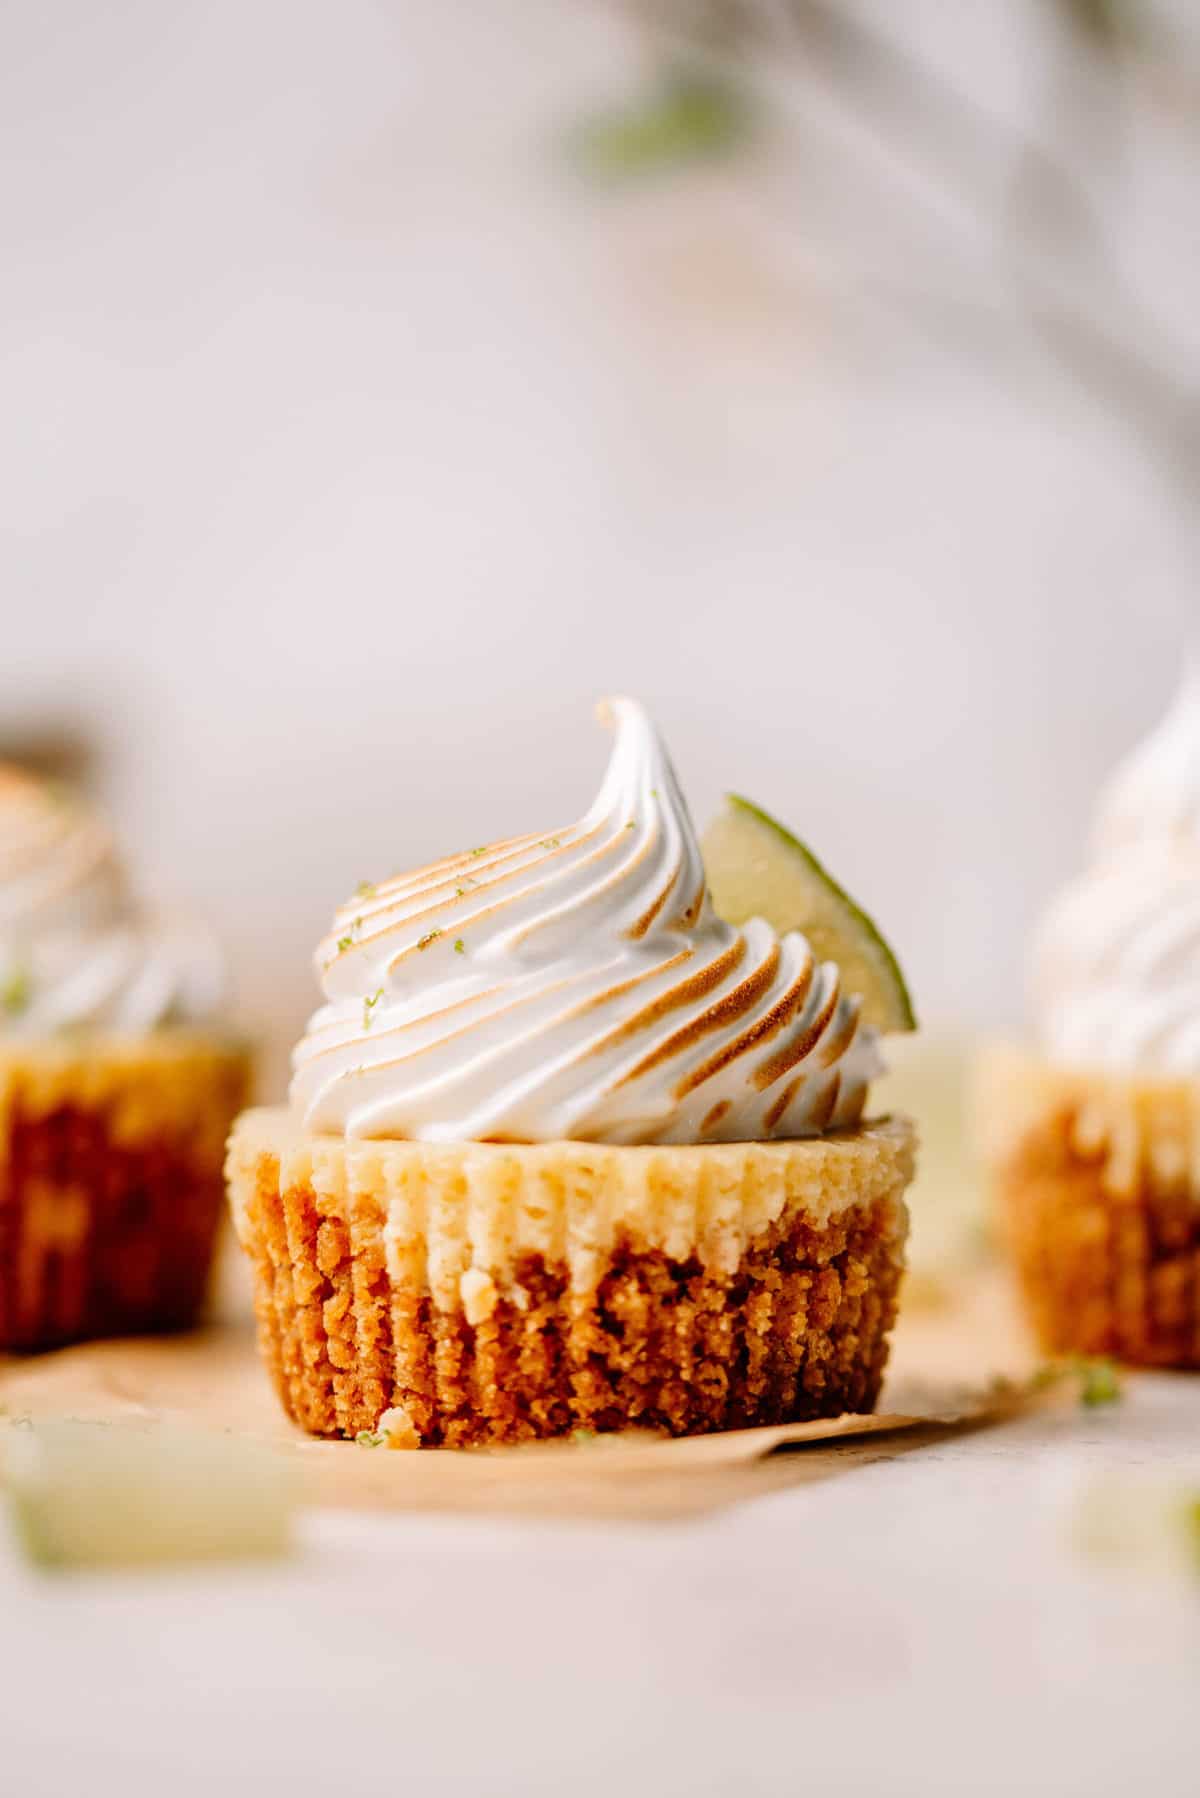 Mini key lime pie with meringue and a slice of lime on brown parchment paper.